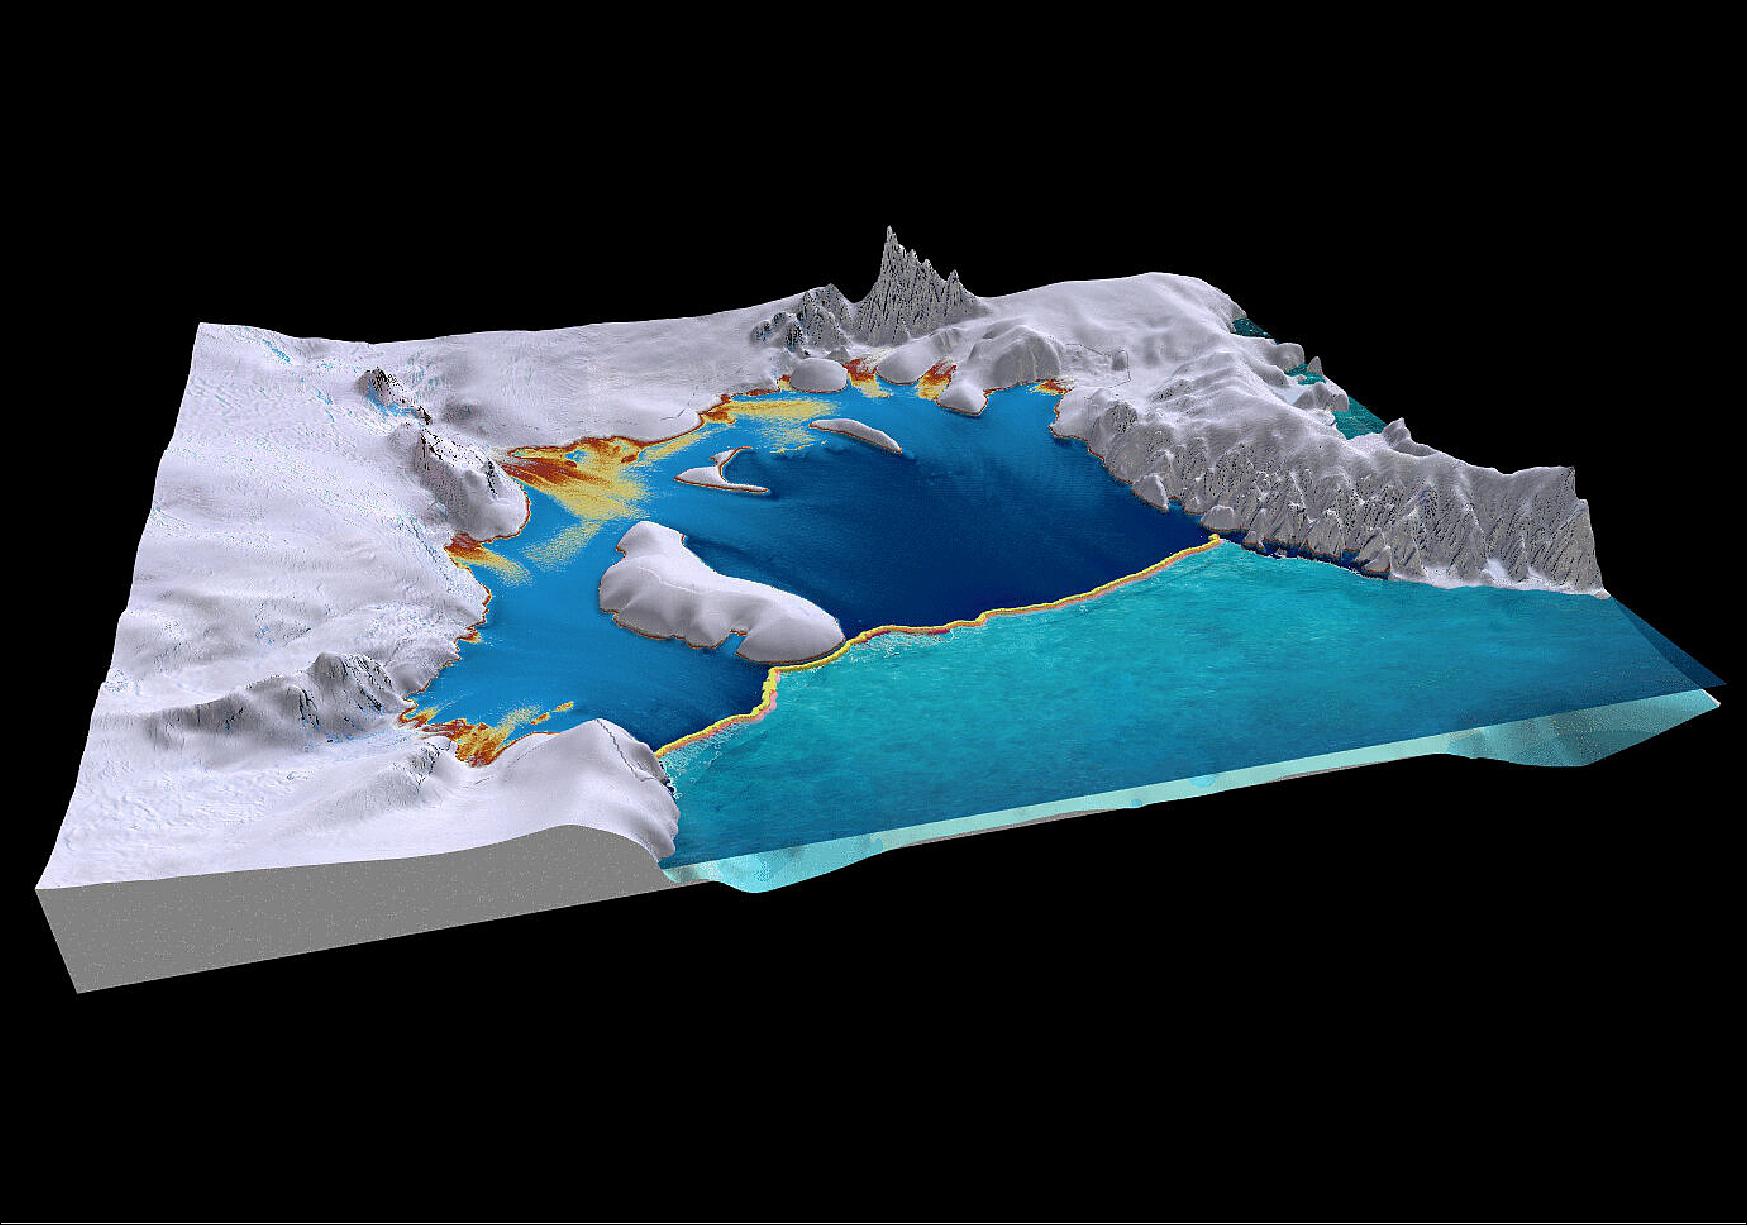 Figure 33: The Filchner-Ronne ice shelf in Antarctica. Applying a new method, called 'elevation edge', to CryoSat-2 data has revealed that the entire Filchner-Ronne ice shelf advanced by more than 800 km2 per year between 2011 and 2018. The growth of the ice shelf was only interrupted by the calving of a 120 km2 iceberg in 2012 and a few smaller-scale events (image credit: ENVEO)